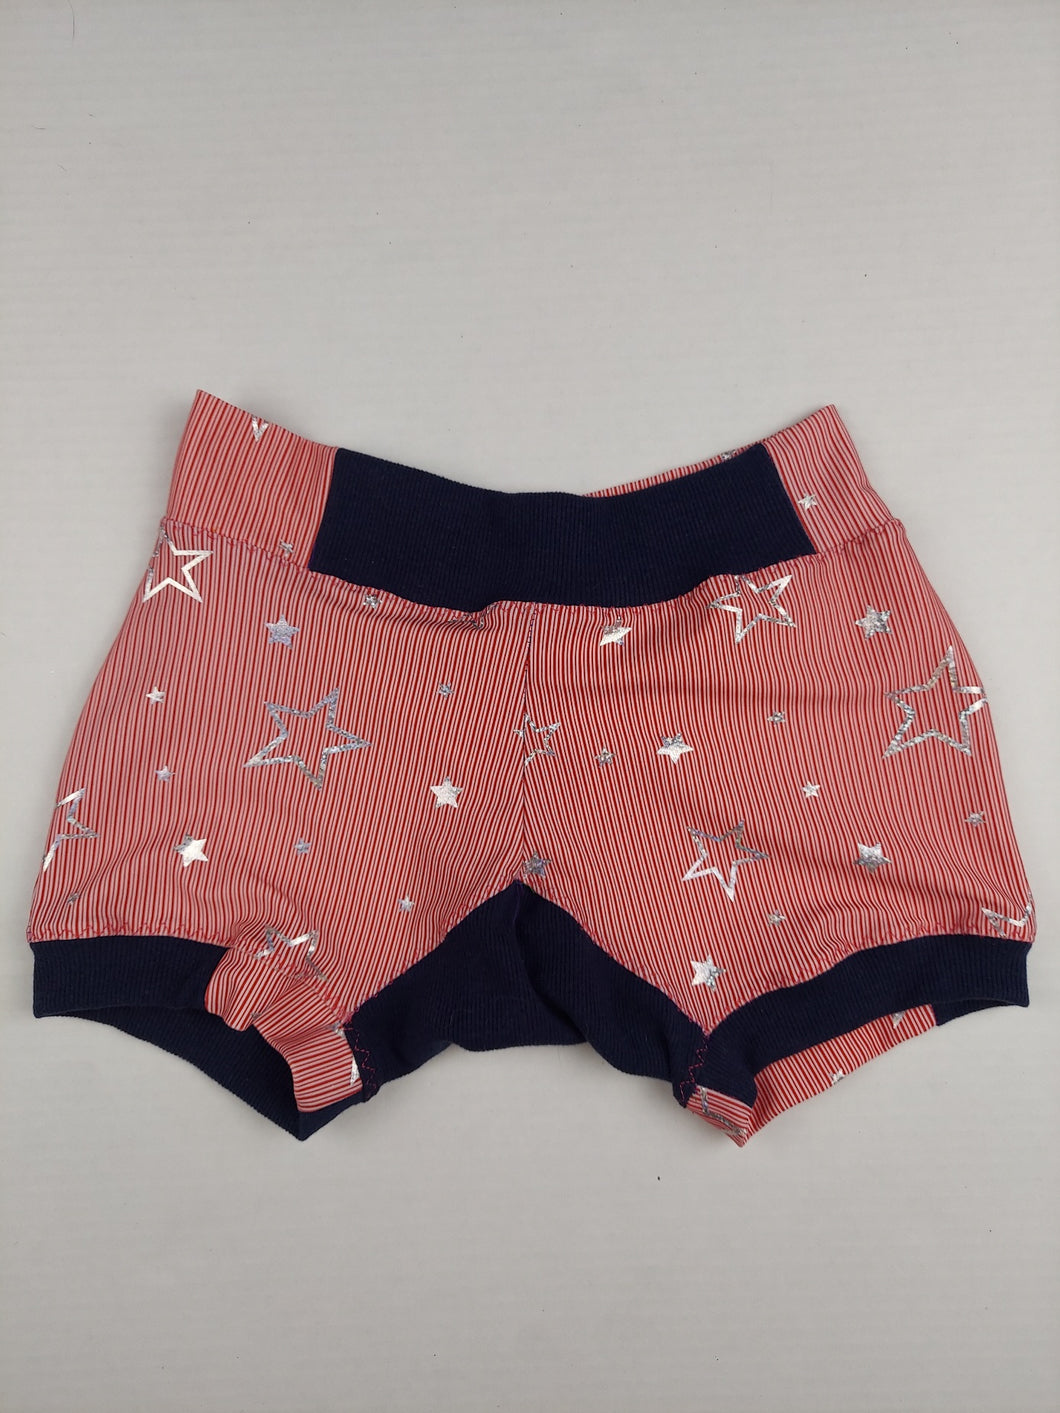 SMALL stars and stripes micro bloomers